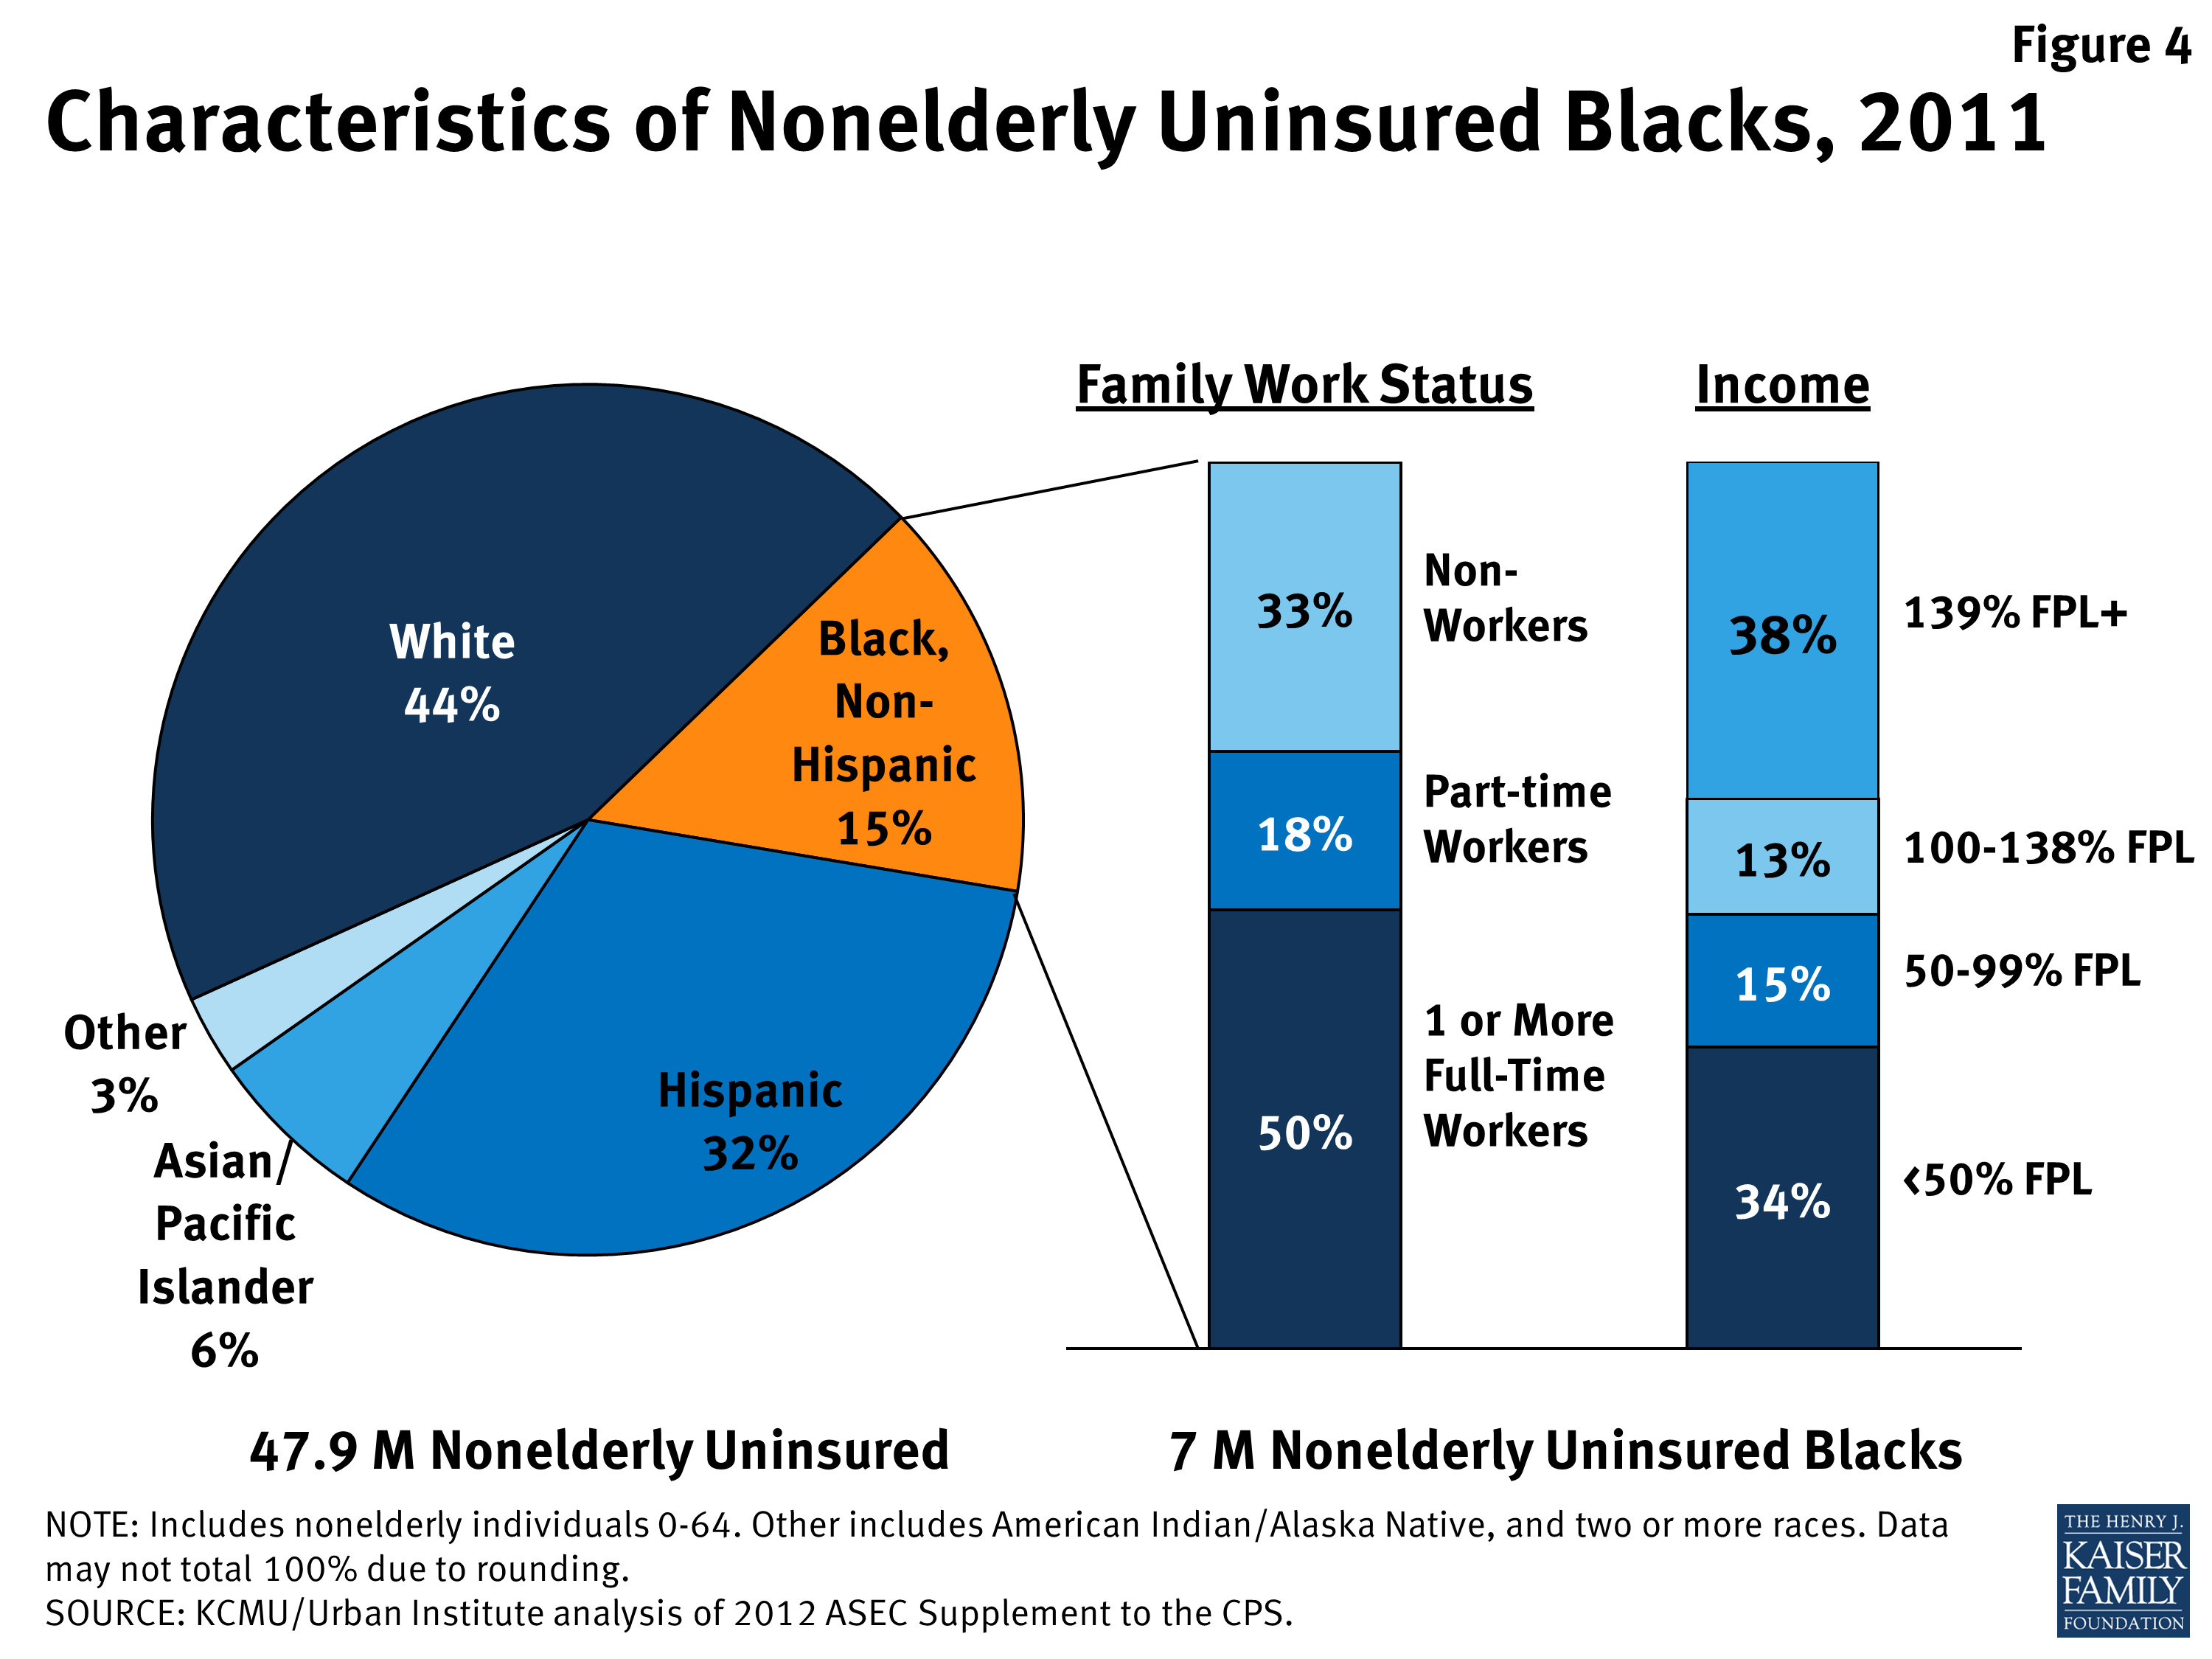 Health Coverage for the Black Population Today and Under the Affordable